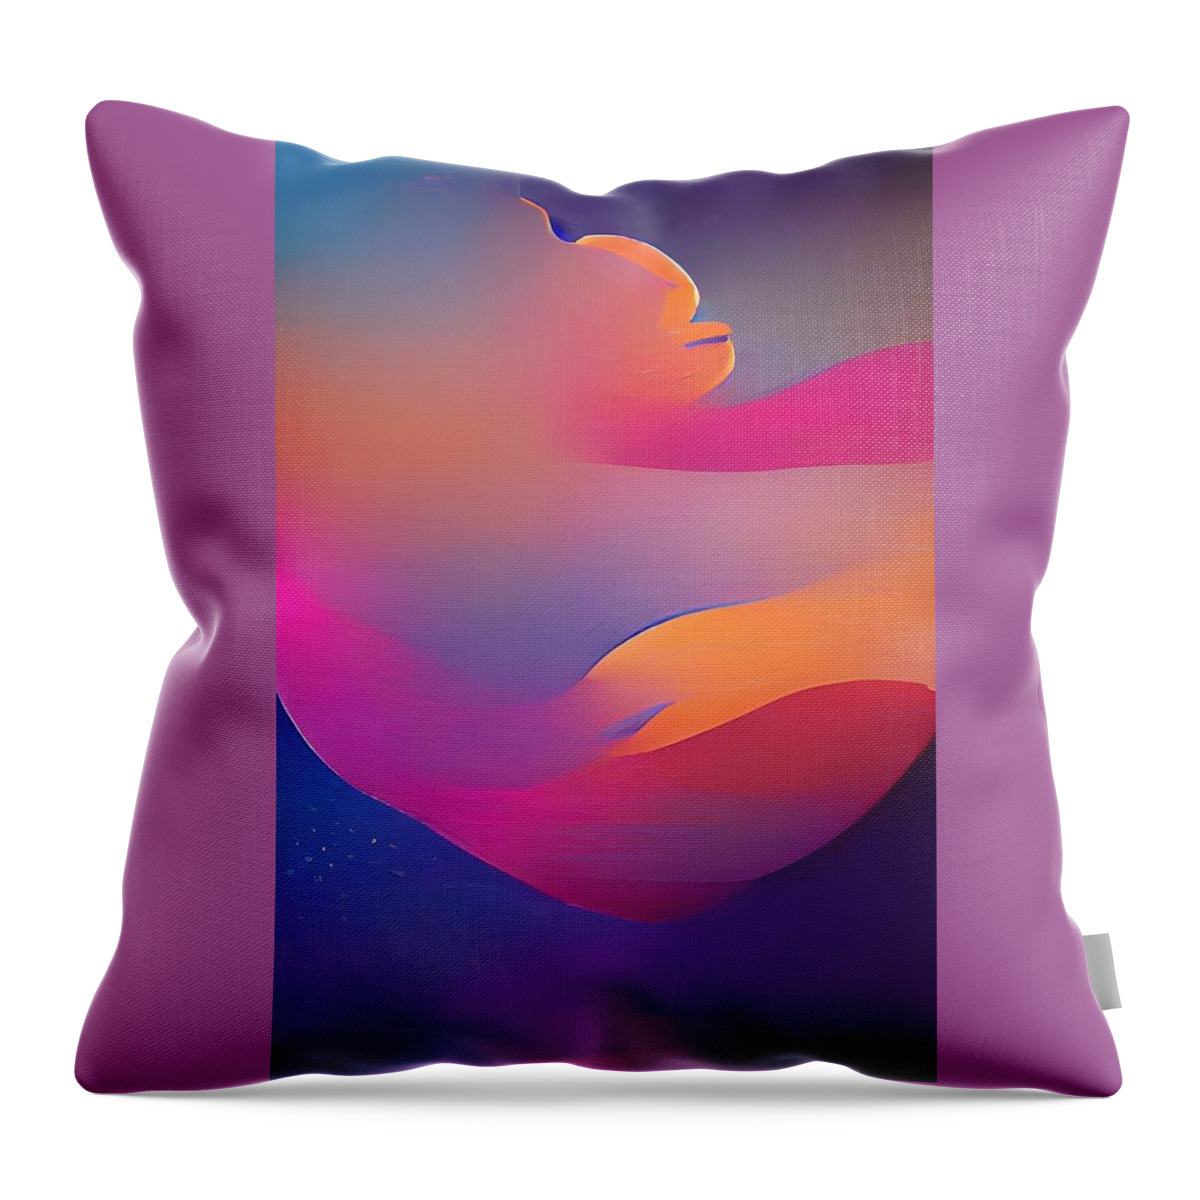  Throw Pillow featuring the digital art Beautiful Valley by Rod Turner